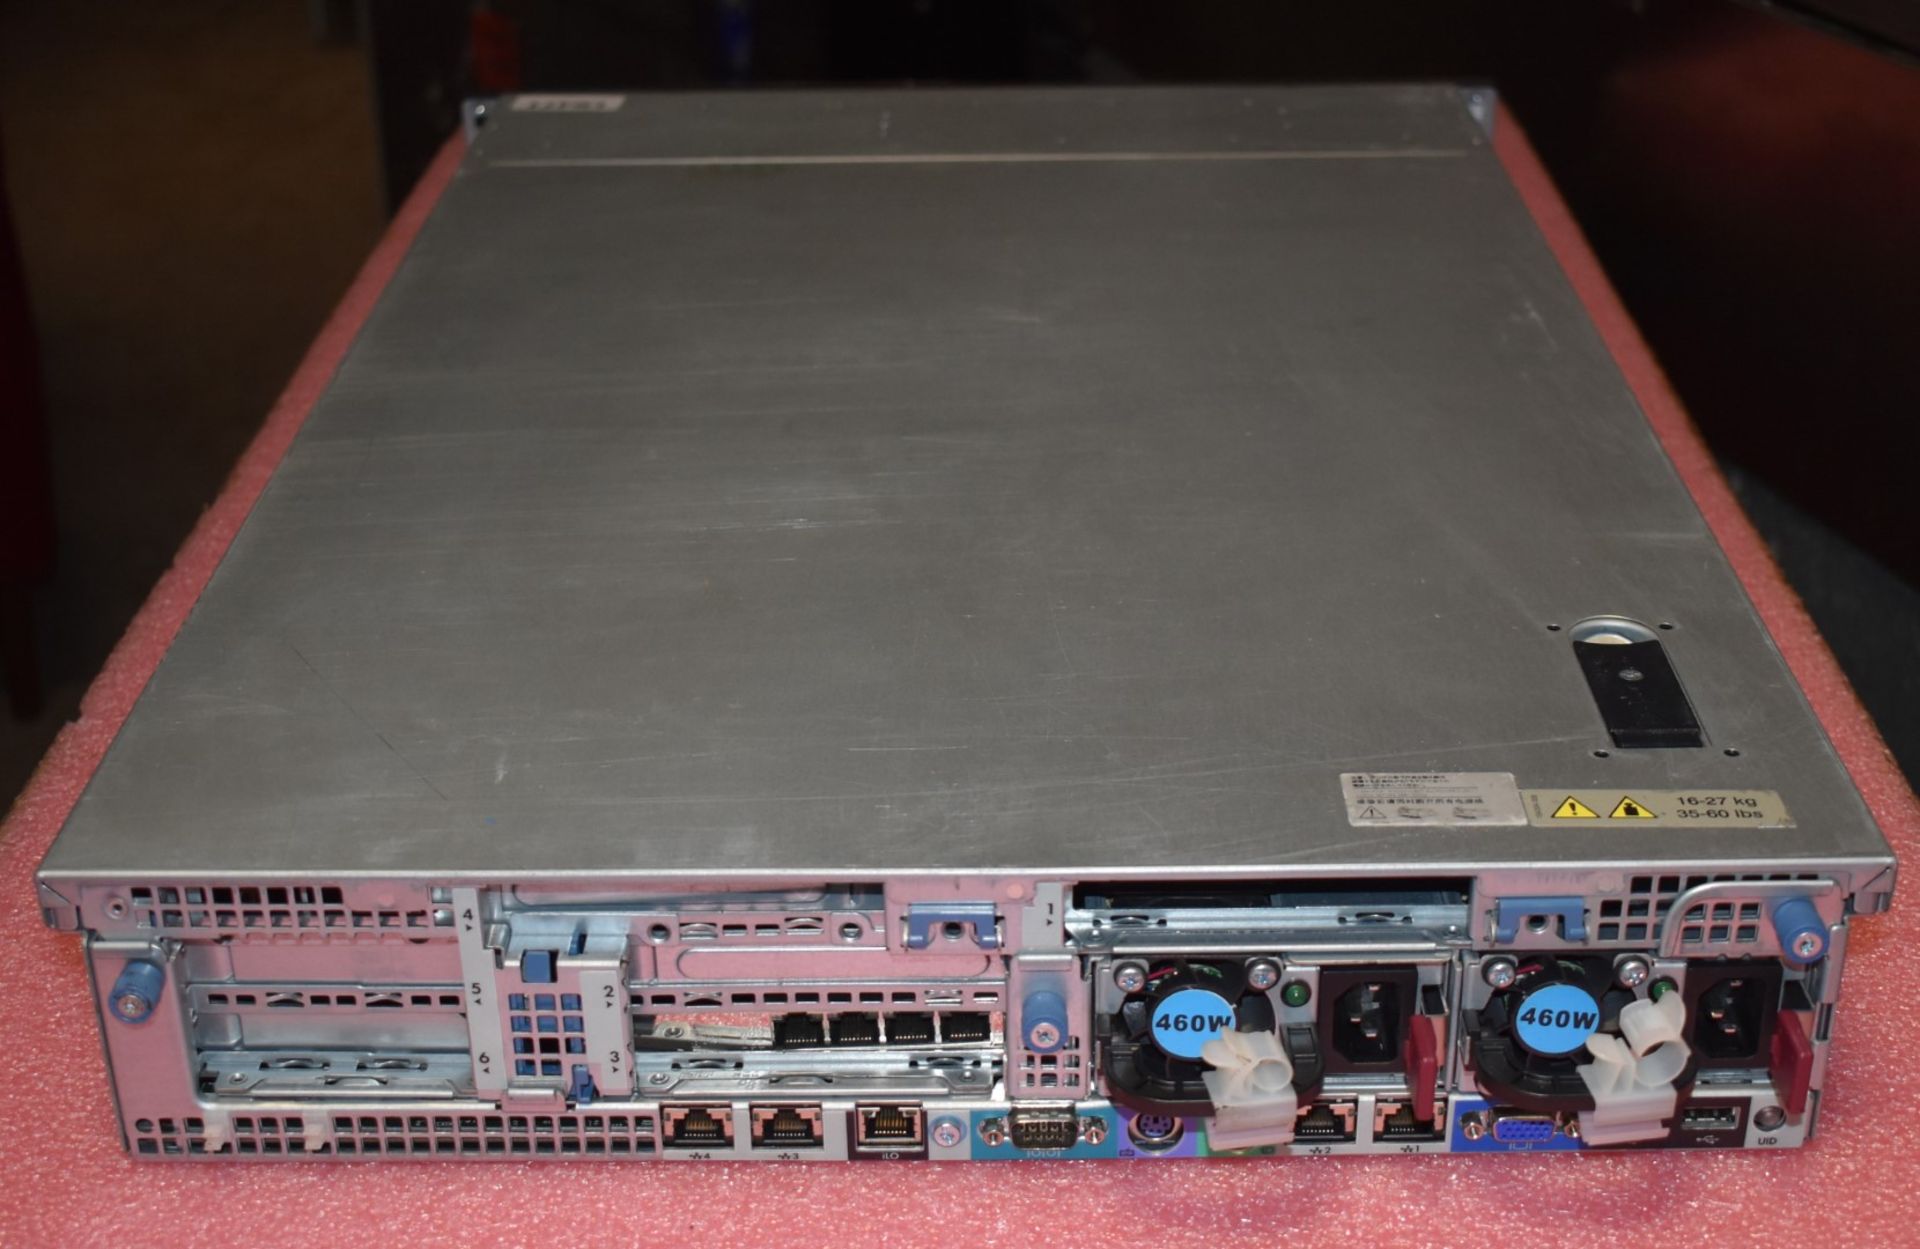 1 x HP ProLiant DL380 G7 Server With 2 x Intel Xeon X5650 Six Core 3.06ghz Processors and 92gb Ram - - Image 4 of 8